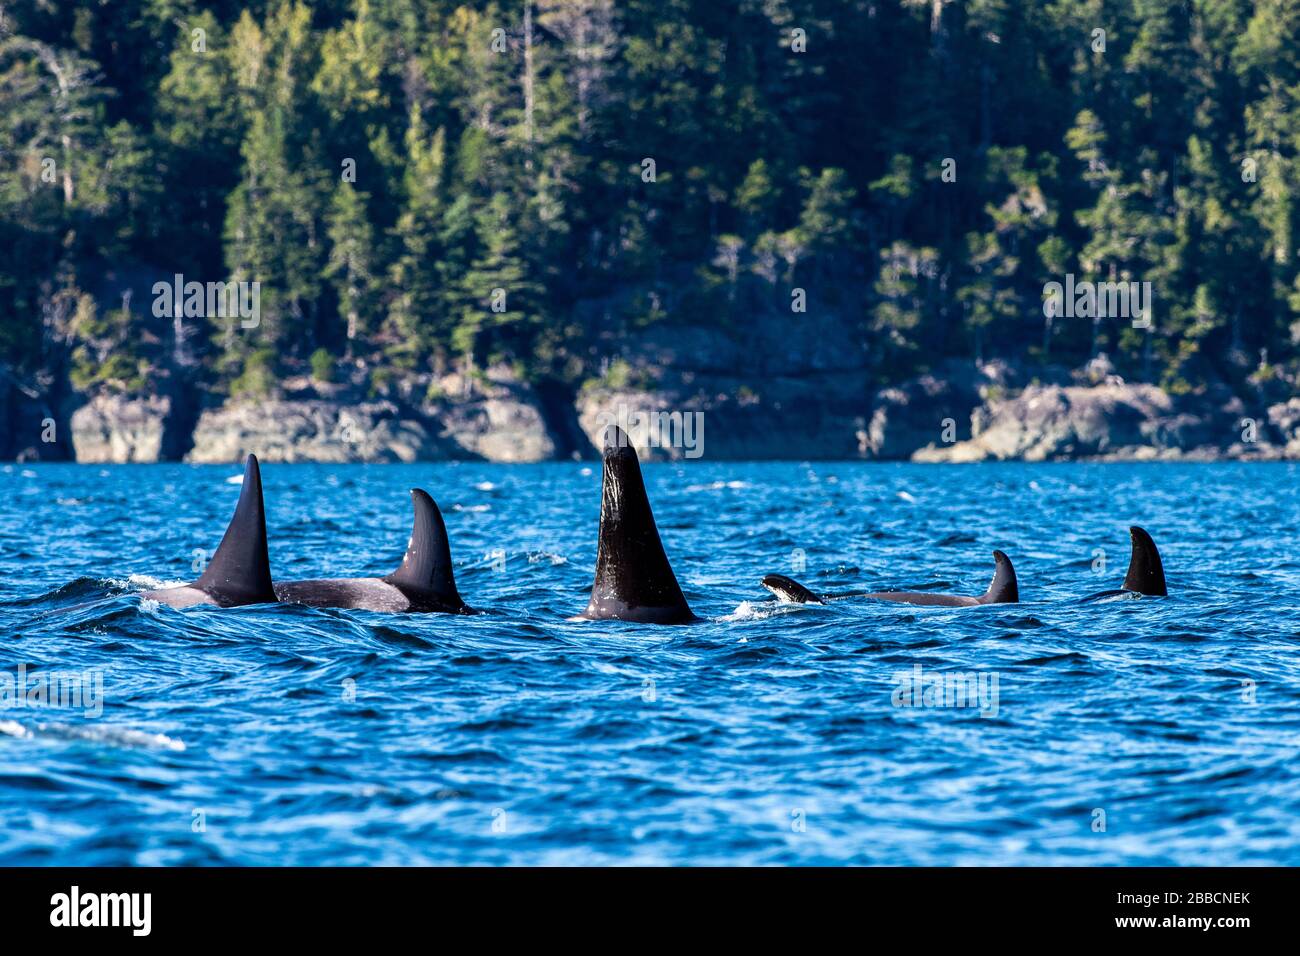 Northern Resident Orca (Orcinus orca) Whales (A pod), Johnstone Straight, Vancouver Island, BC, Canada Stock Photo